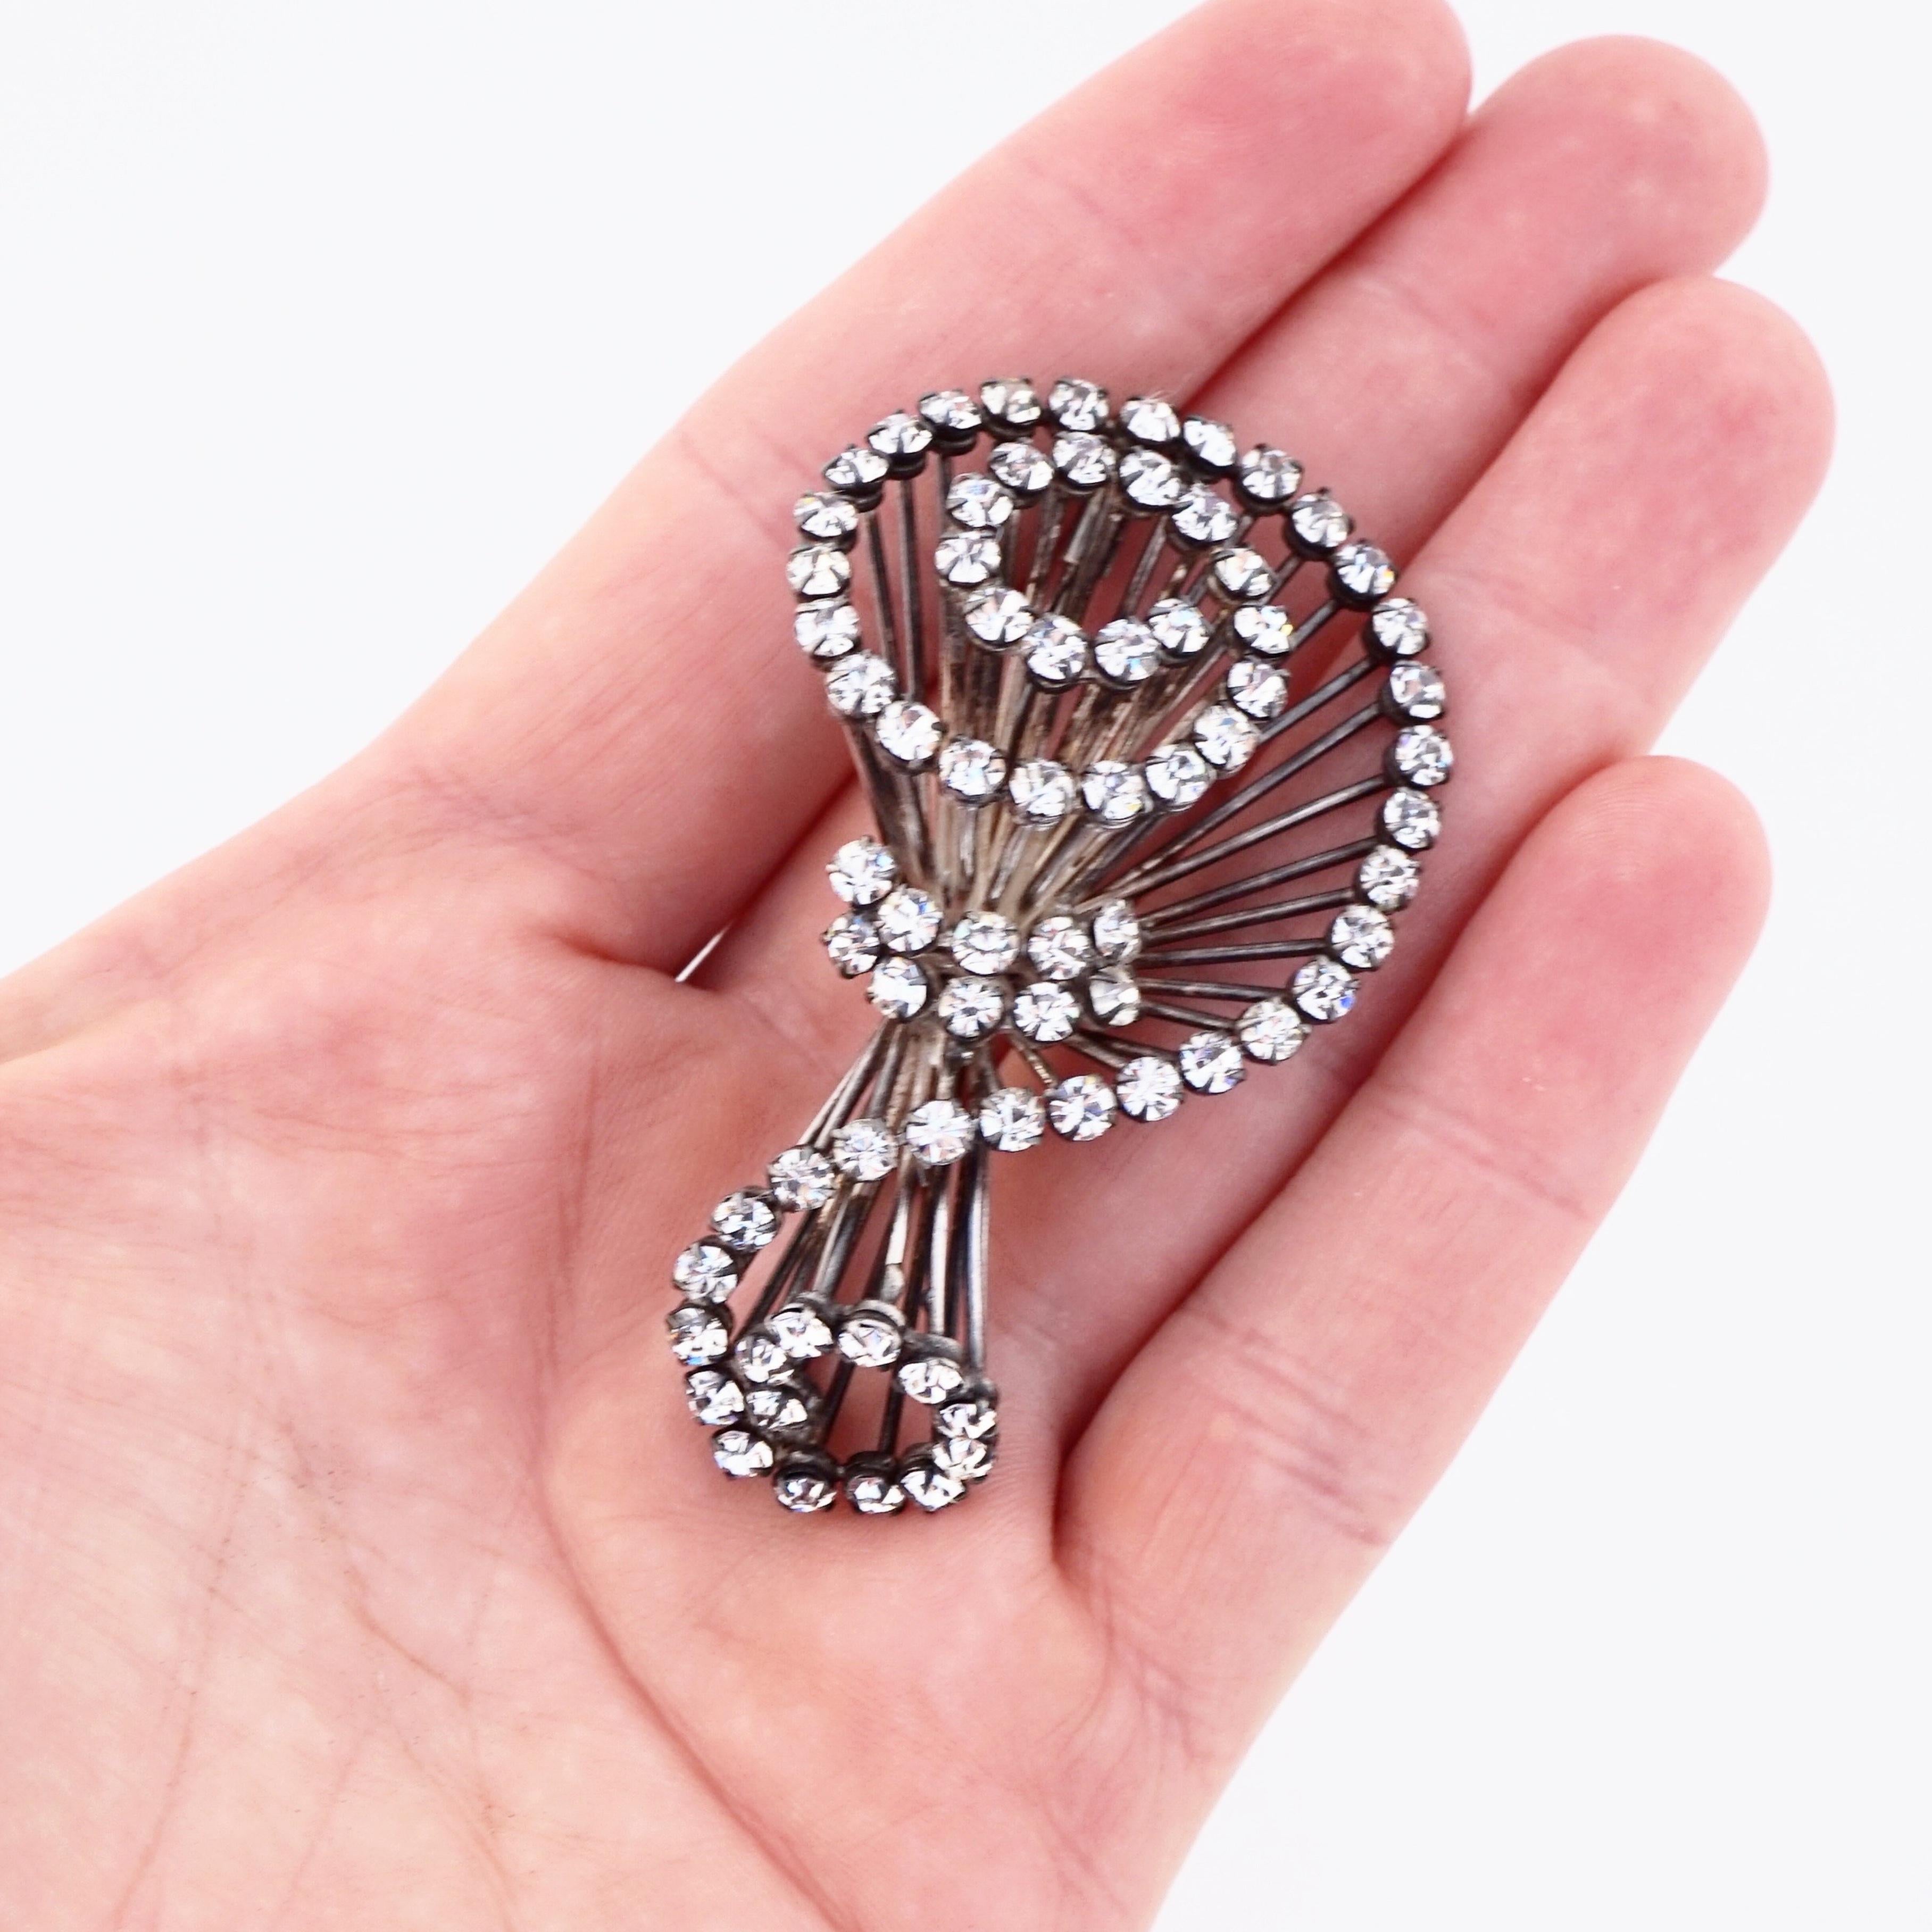 Sterling Silver Swirled Wire Bunch Brooch With Crystals, 1940s 2